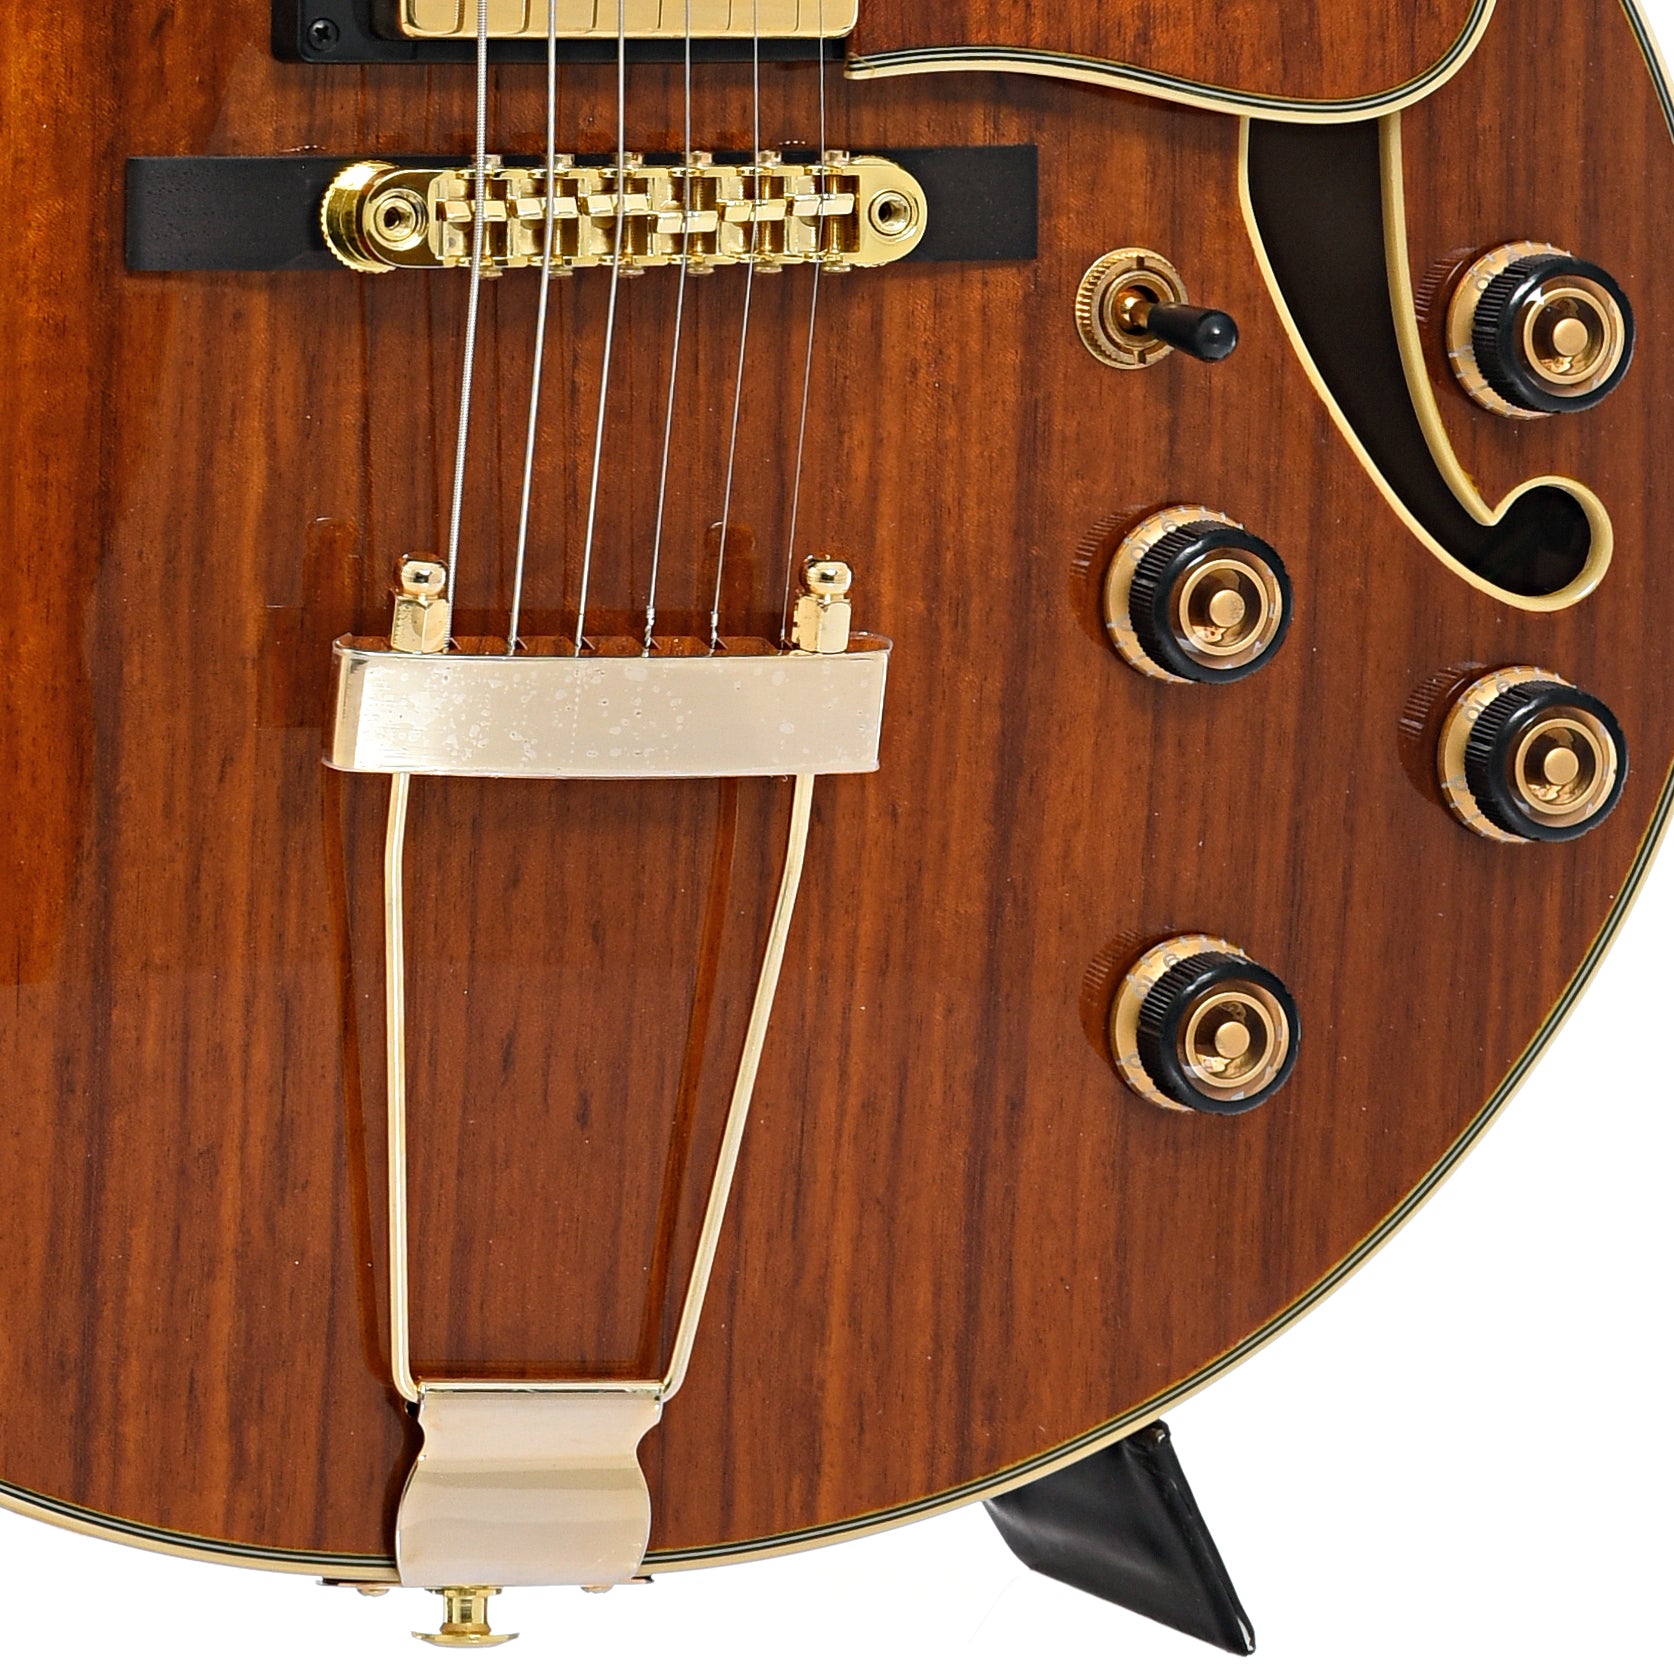 Tailpiece, bridge and controls of Ibanez Artcore Expressionist AG95K Hollowbody Guitar, Natural